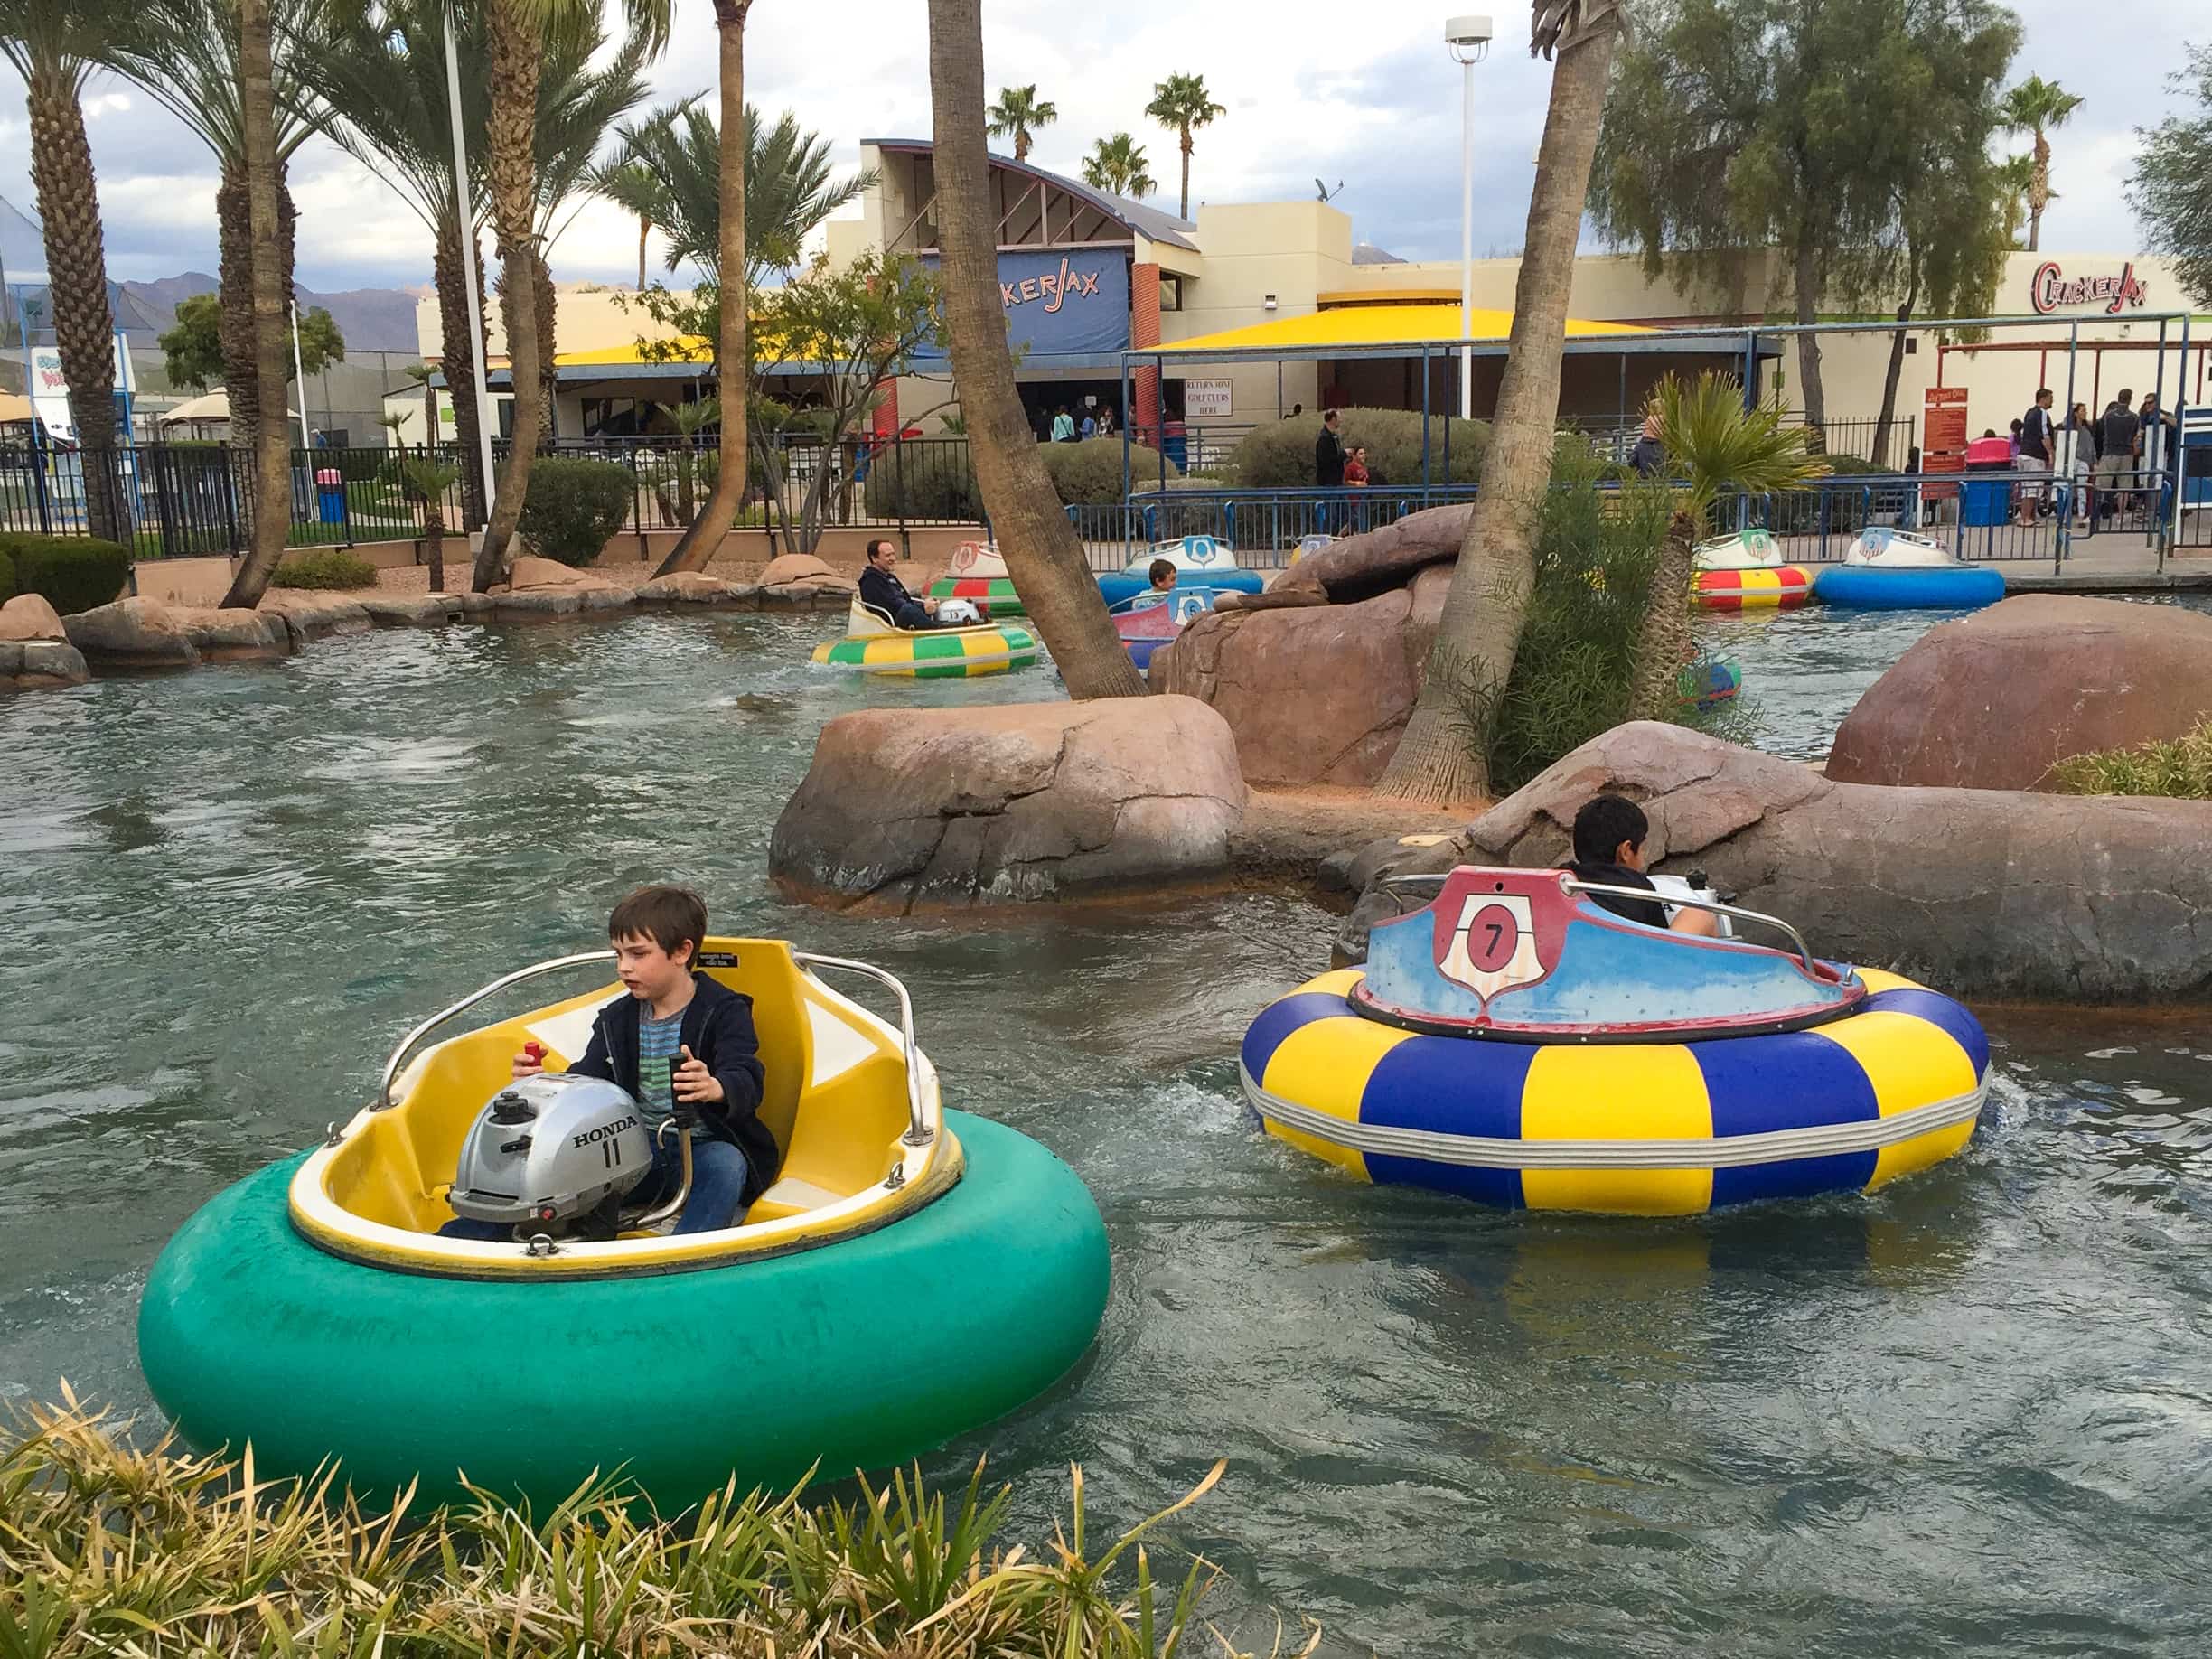 Bumper Boats at Crackerjax in Scottsdale with kids